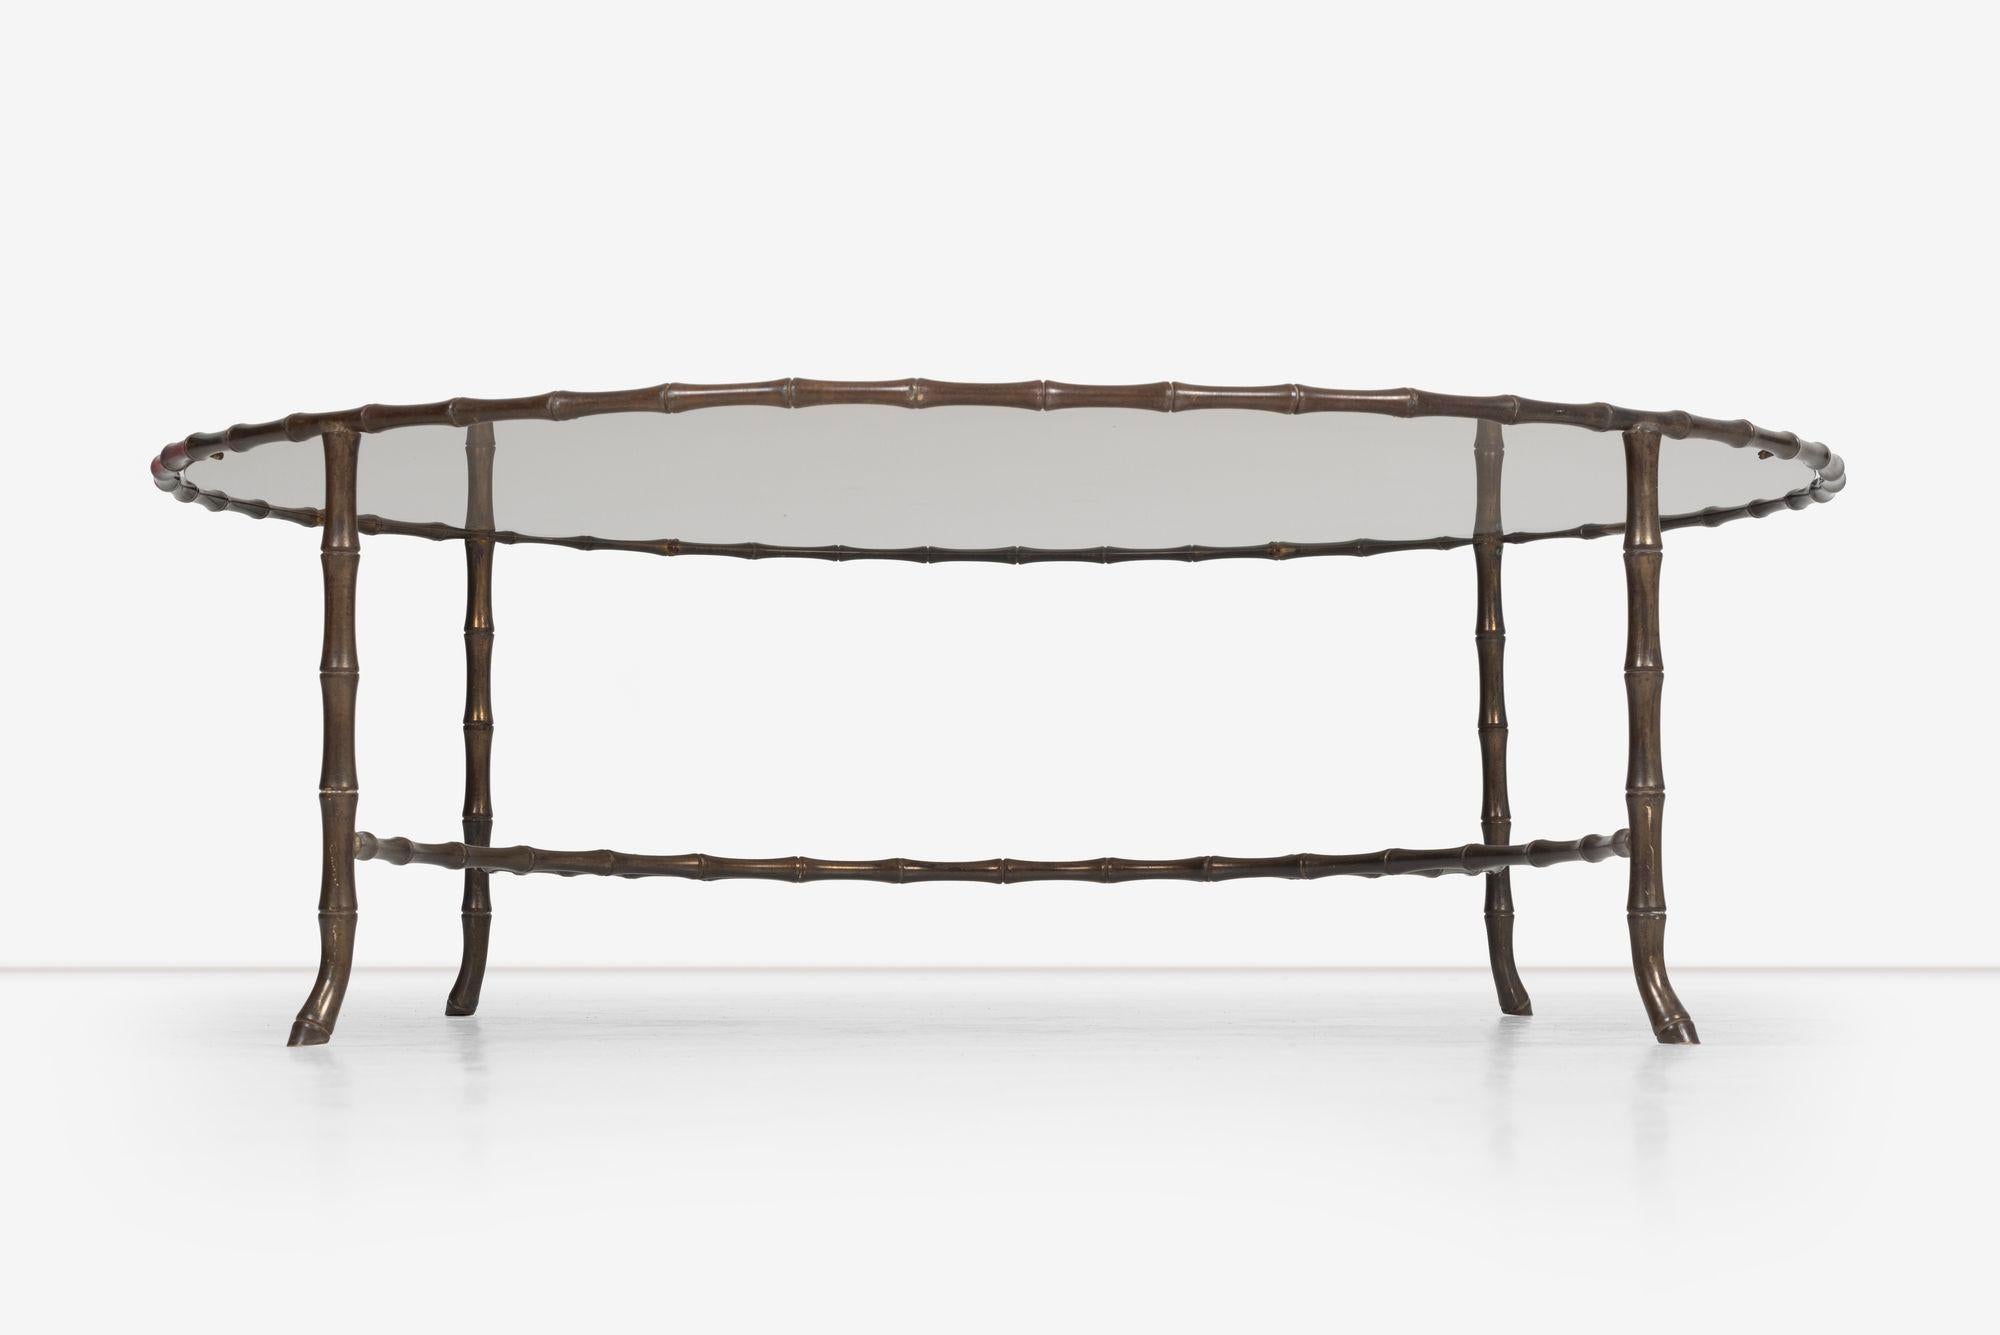 Maison Jansen Style Faux Metal Bamboo Round Cocktail Table, Bronze base with half circle supports and hooved feet inset 1/2